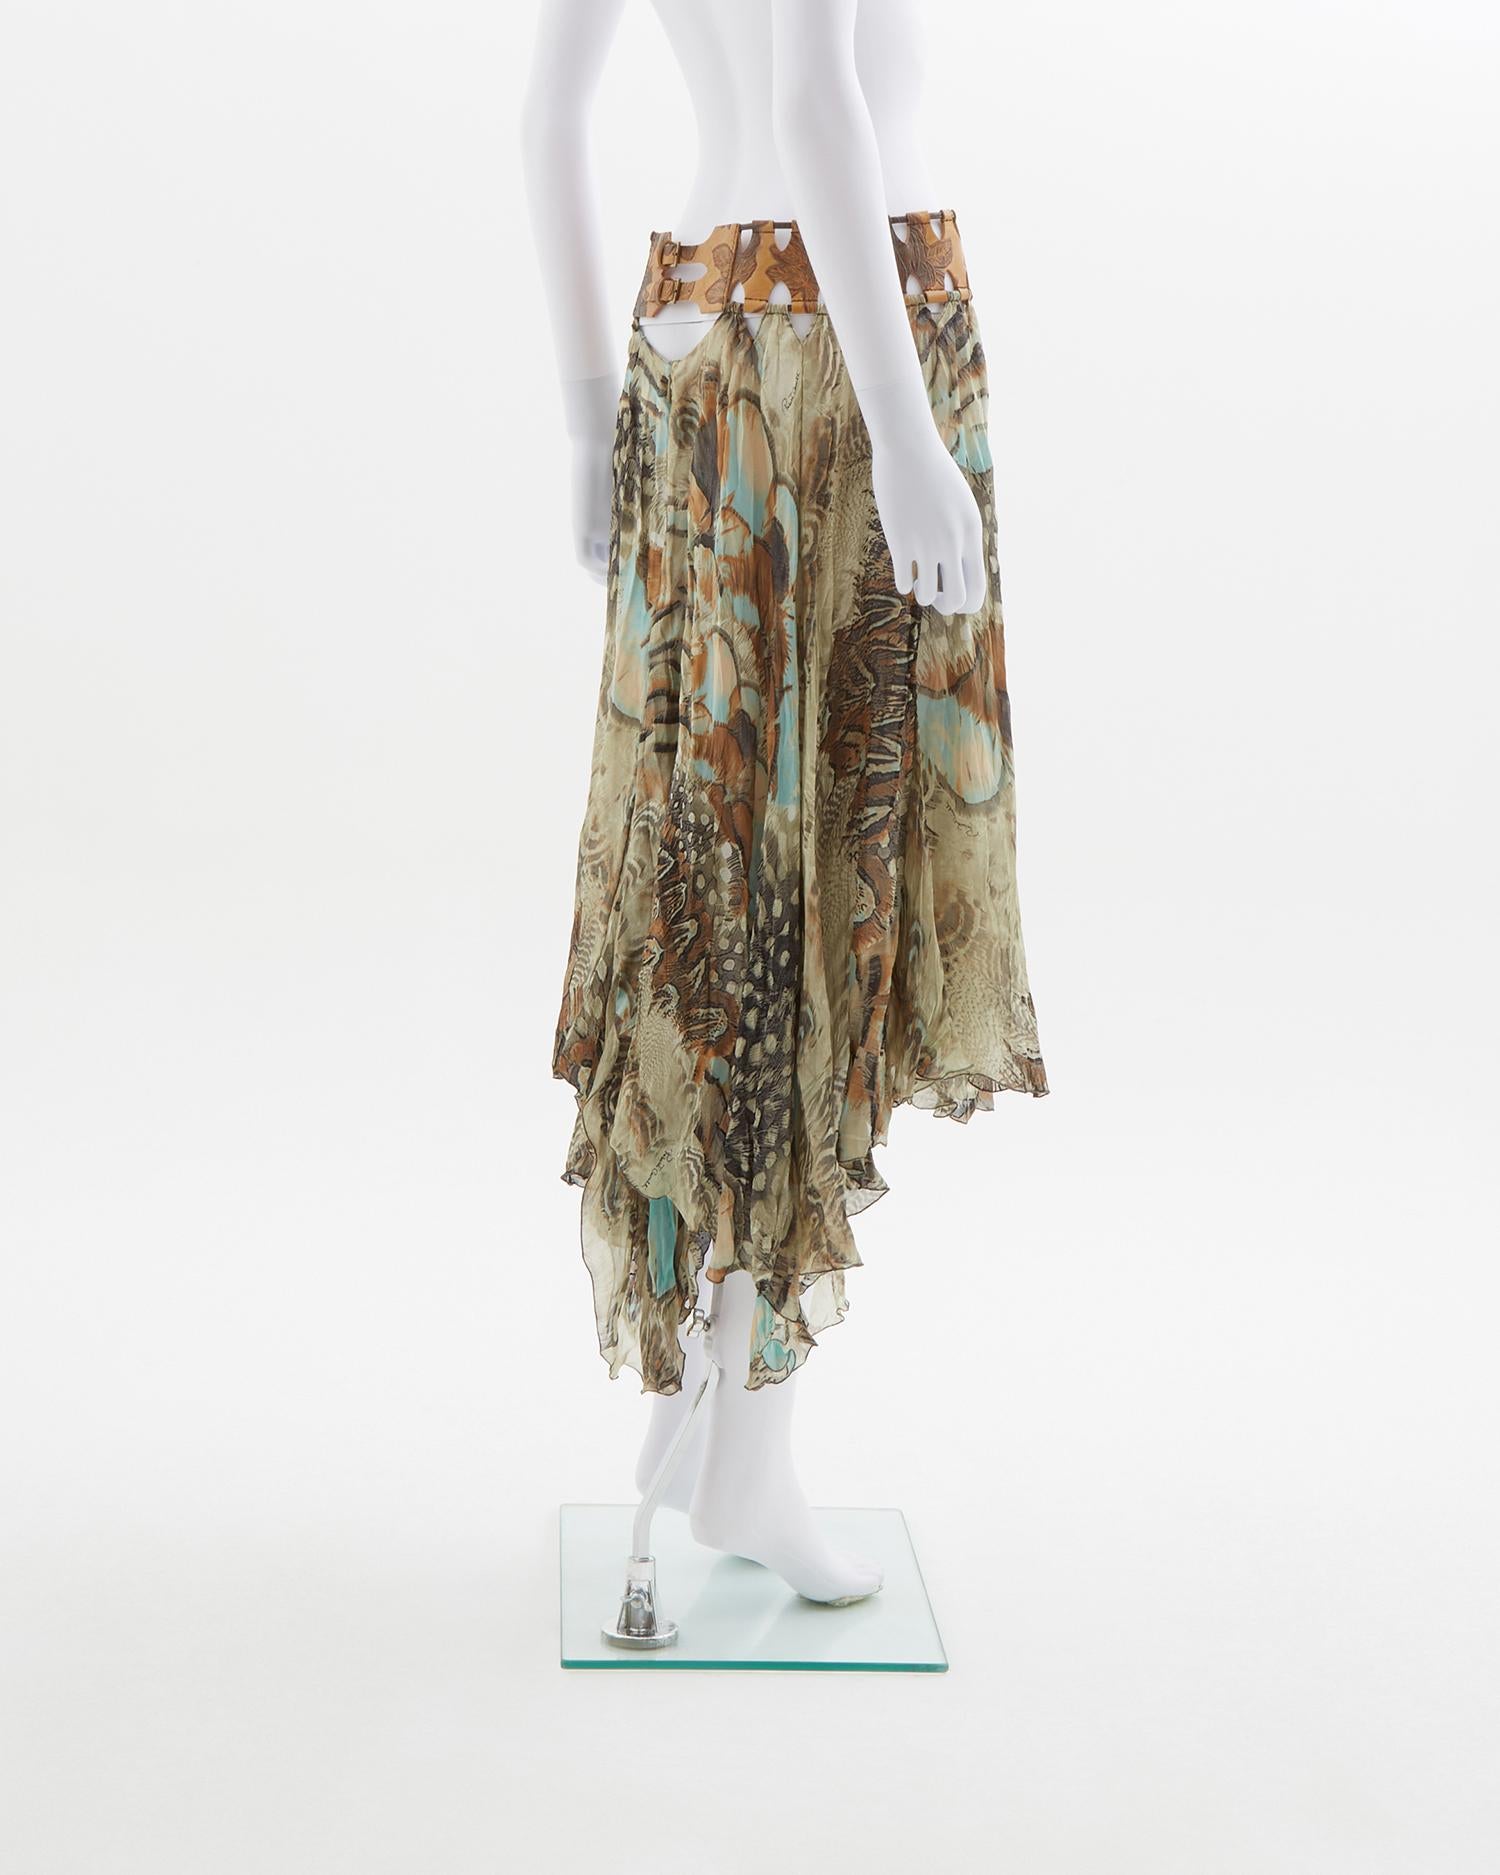 - Runway Look 51
- Sold by Skof.Archive
- Multicolor feather print silk 
- Dramatic fishtail ruffle hem with cutouts 
- Leather waistband 
- Two buckles and zipper back closure 
- Spring Summer 2004
- Made in Italy 

Size : FR 38 - IT 42 - UK 10 -